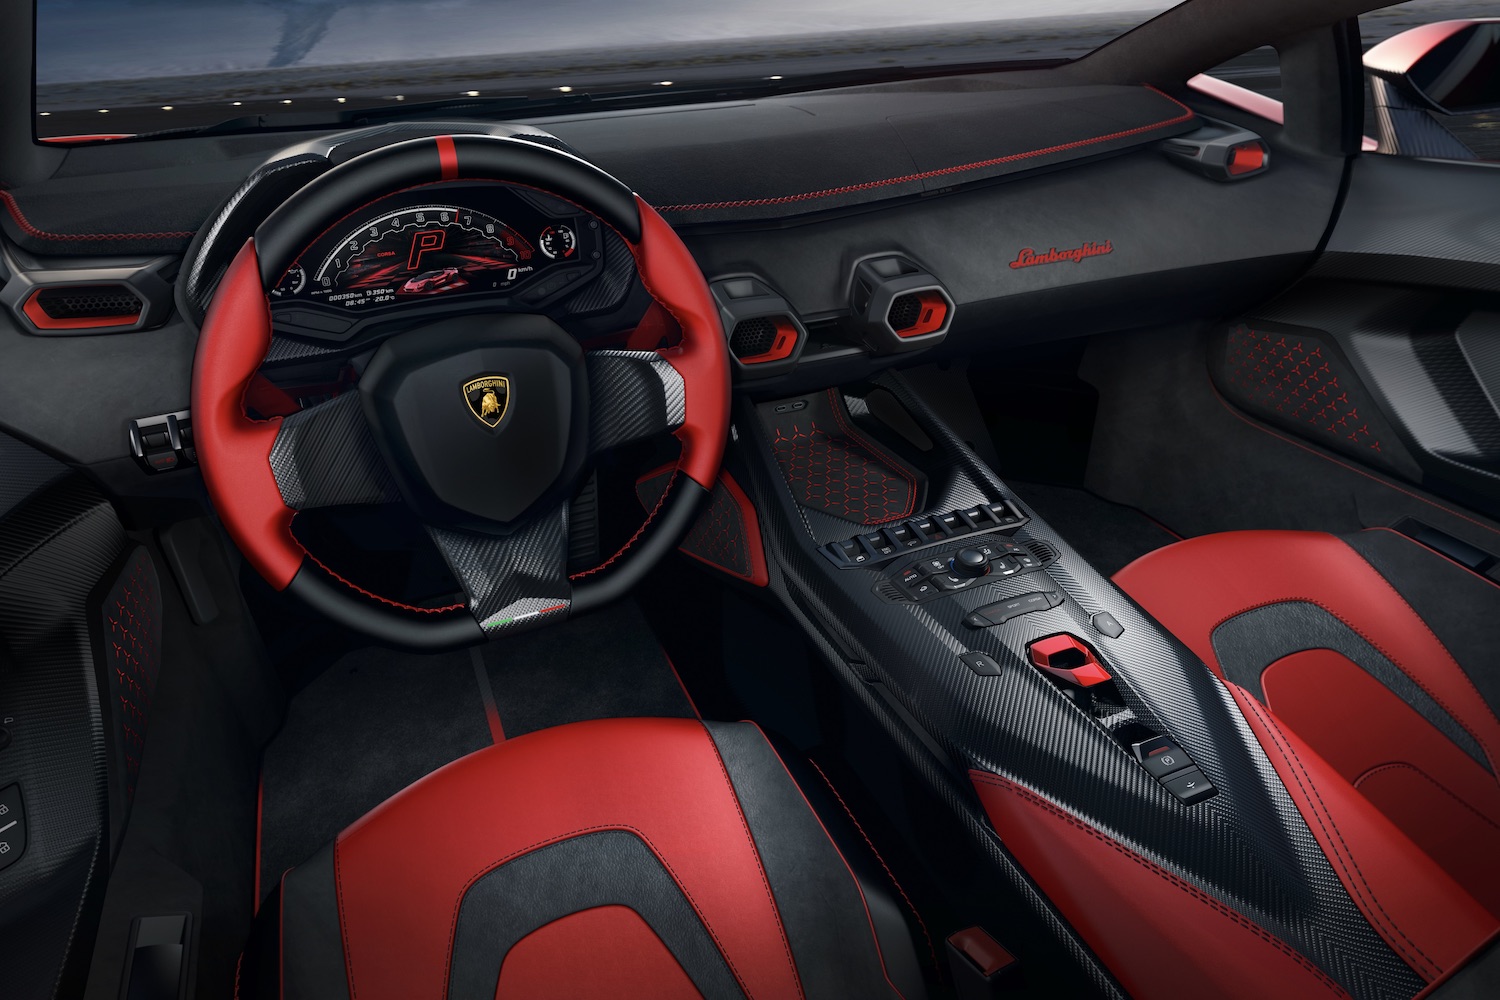 Close up of steering wheel and dashboard in the Lamborghini Invencible with dark clouds in the back.